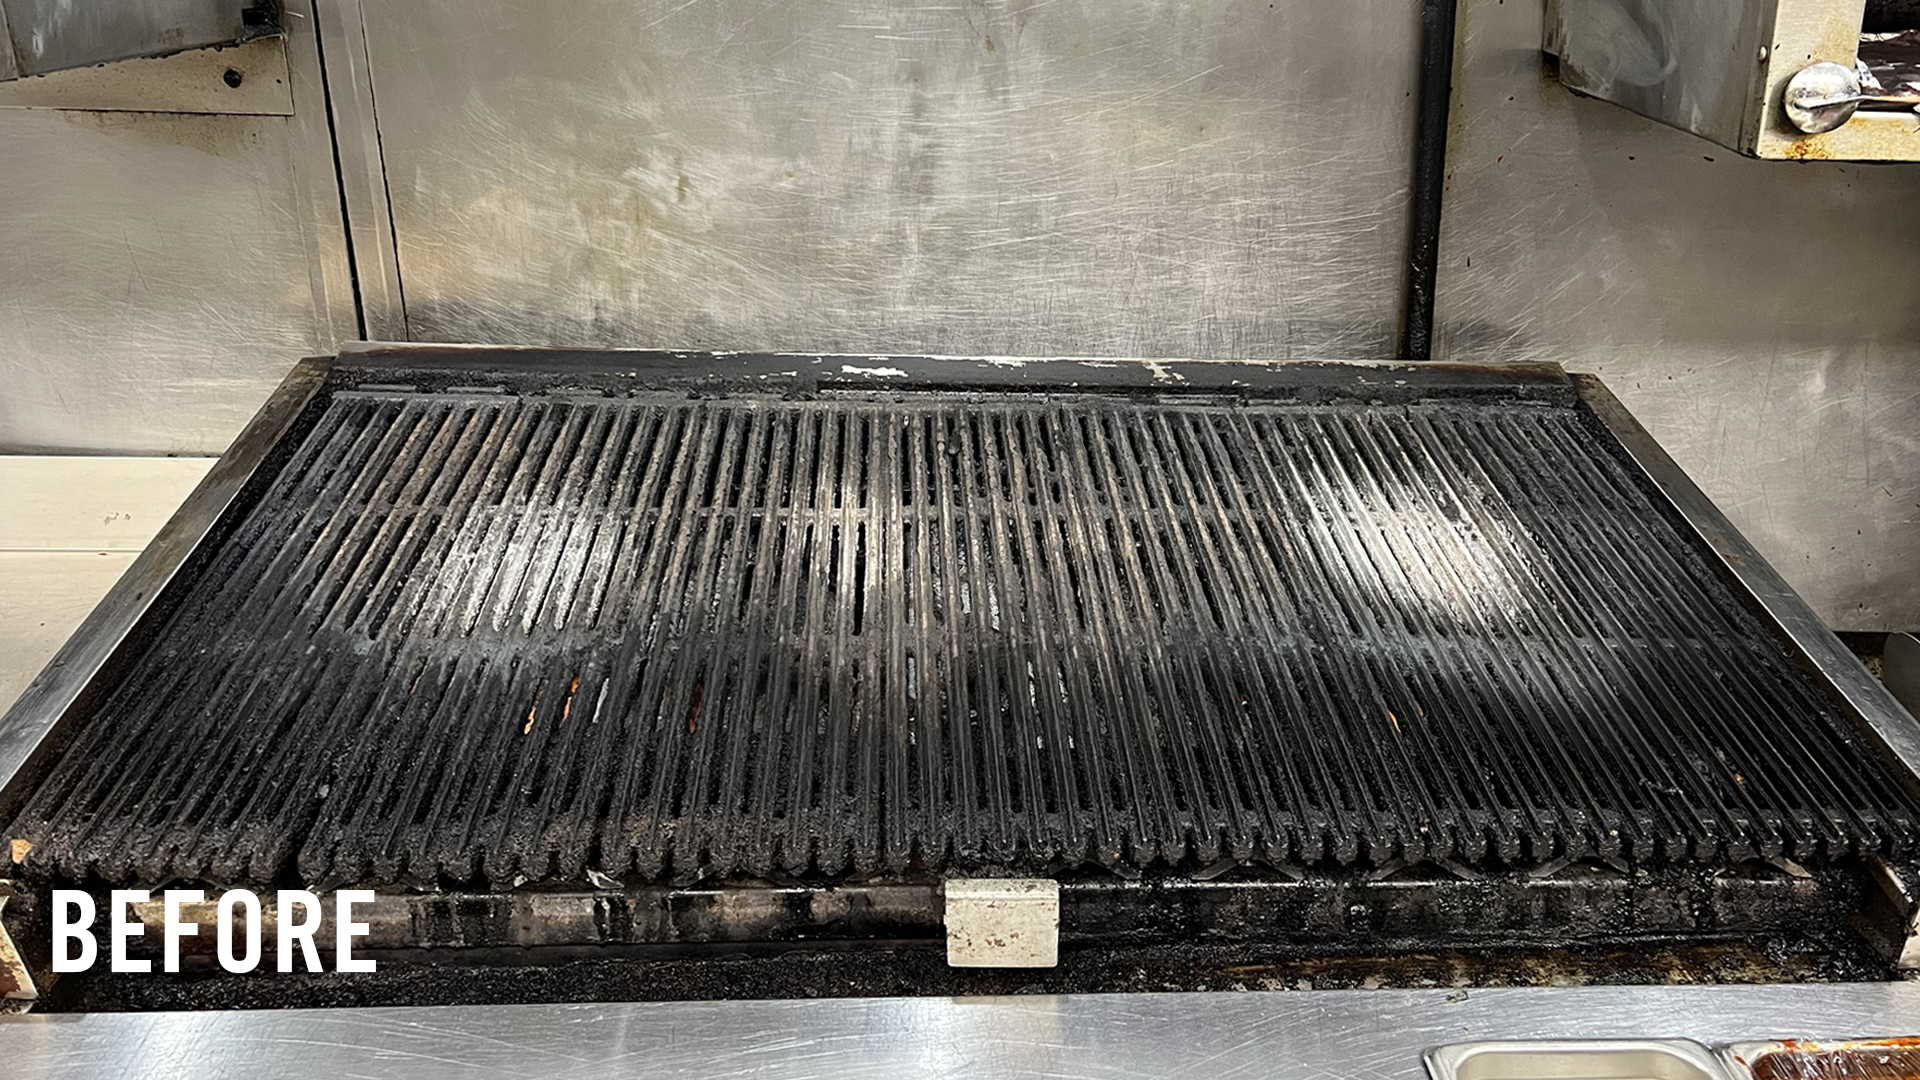 Before cleaning grill with the grill brush